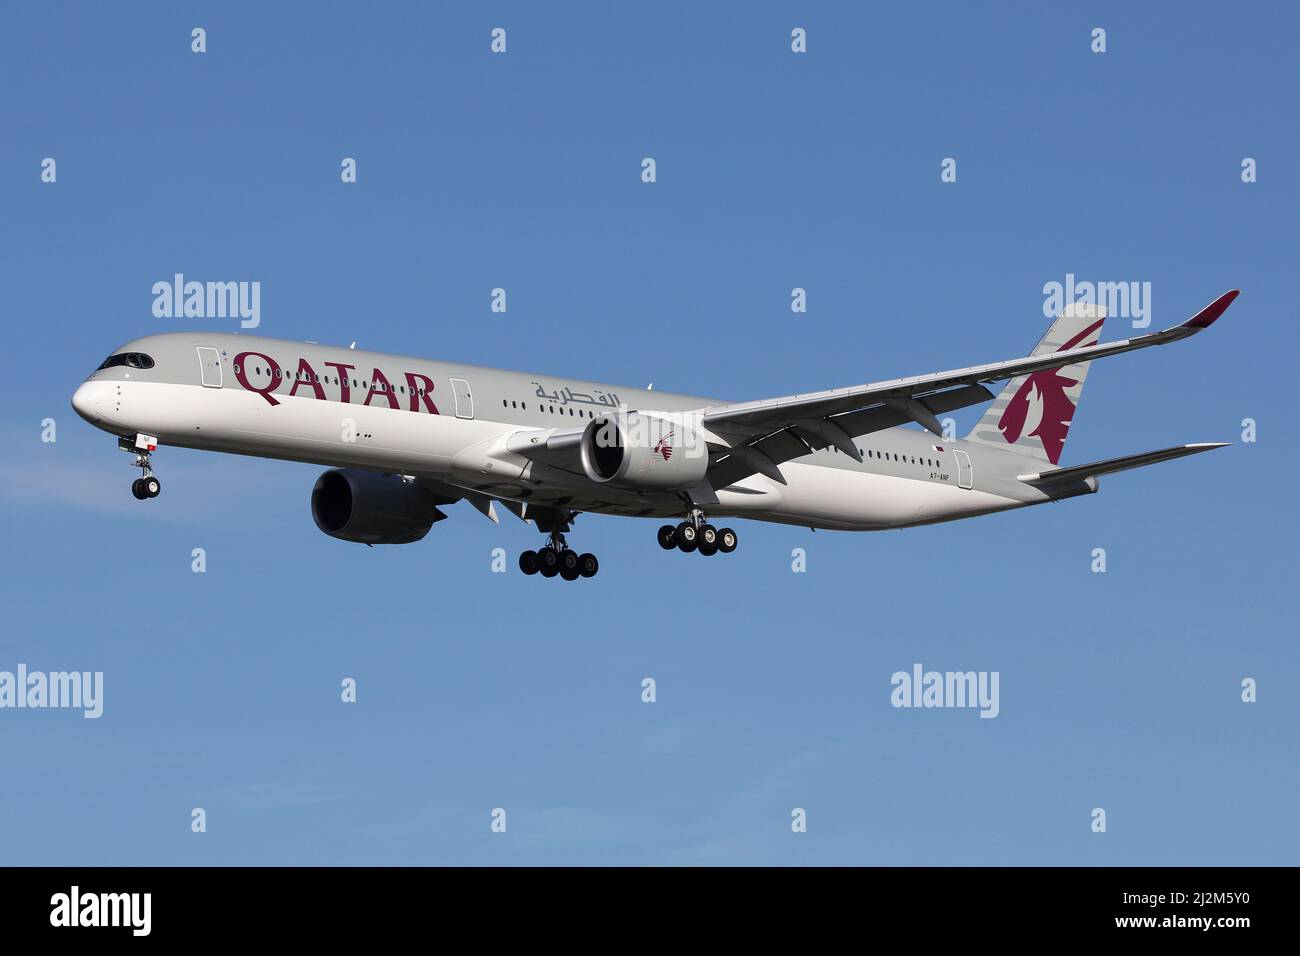 Qatar Airways Airbus A350-1000. Qatar Airways and Airbus remain in a legal dispute relating to issues with lightning protection and paint degradation Stock Photo